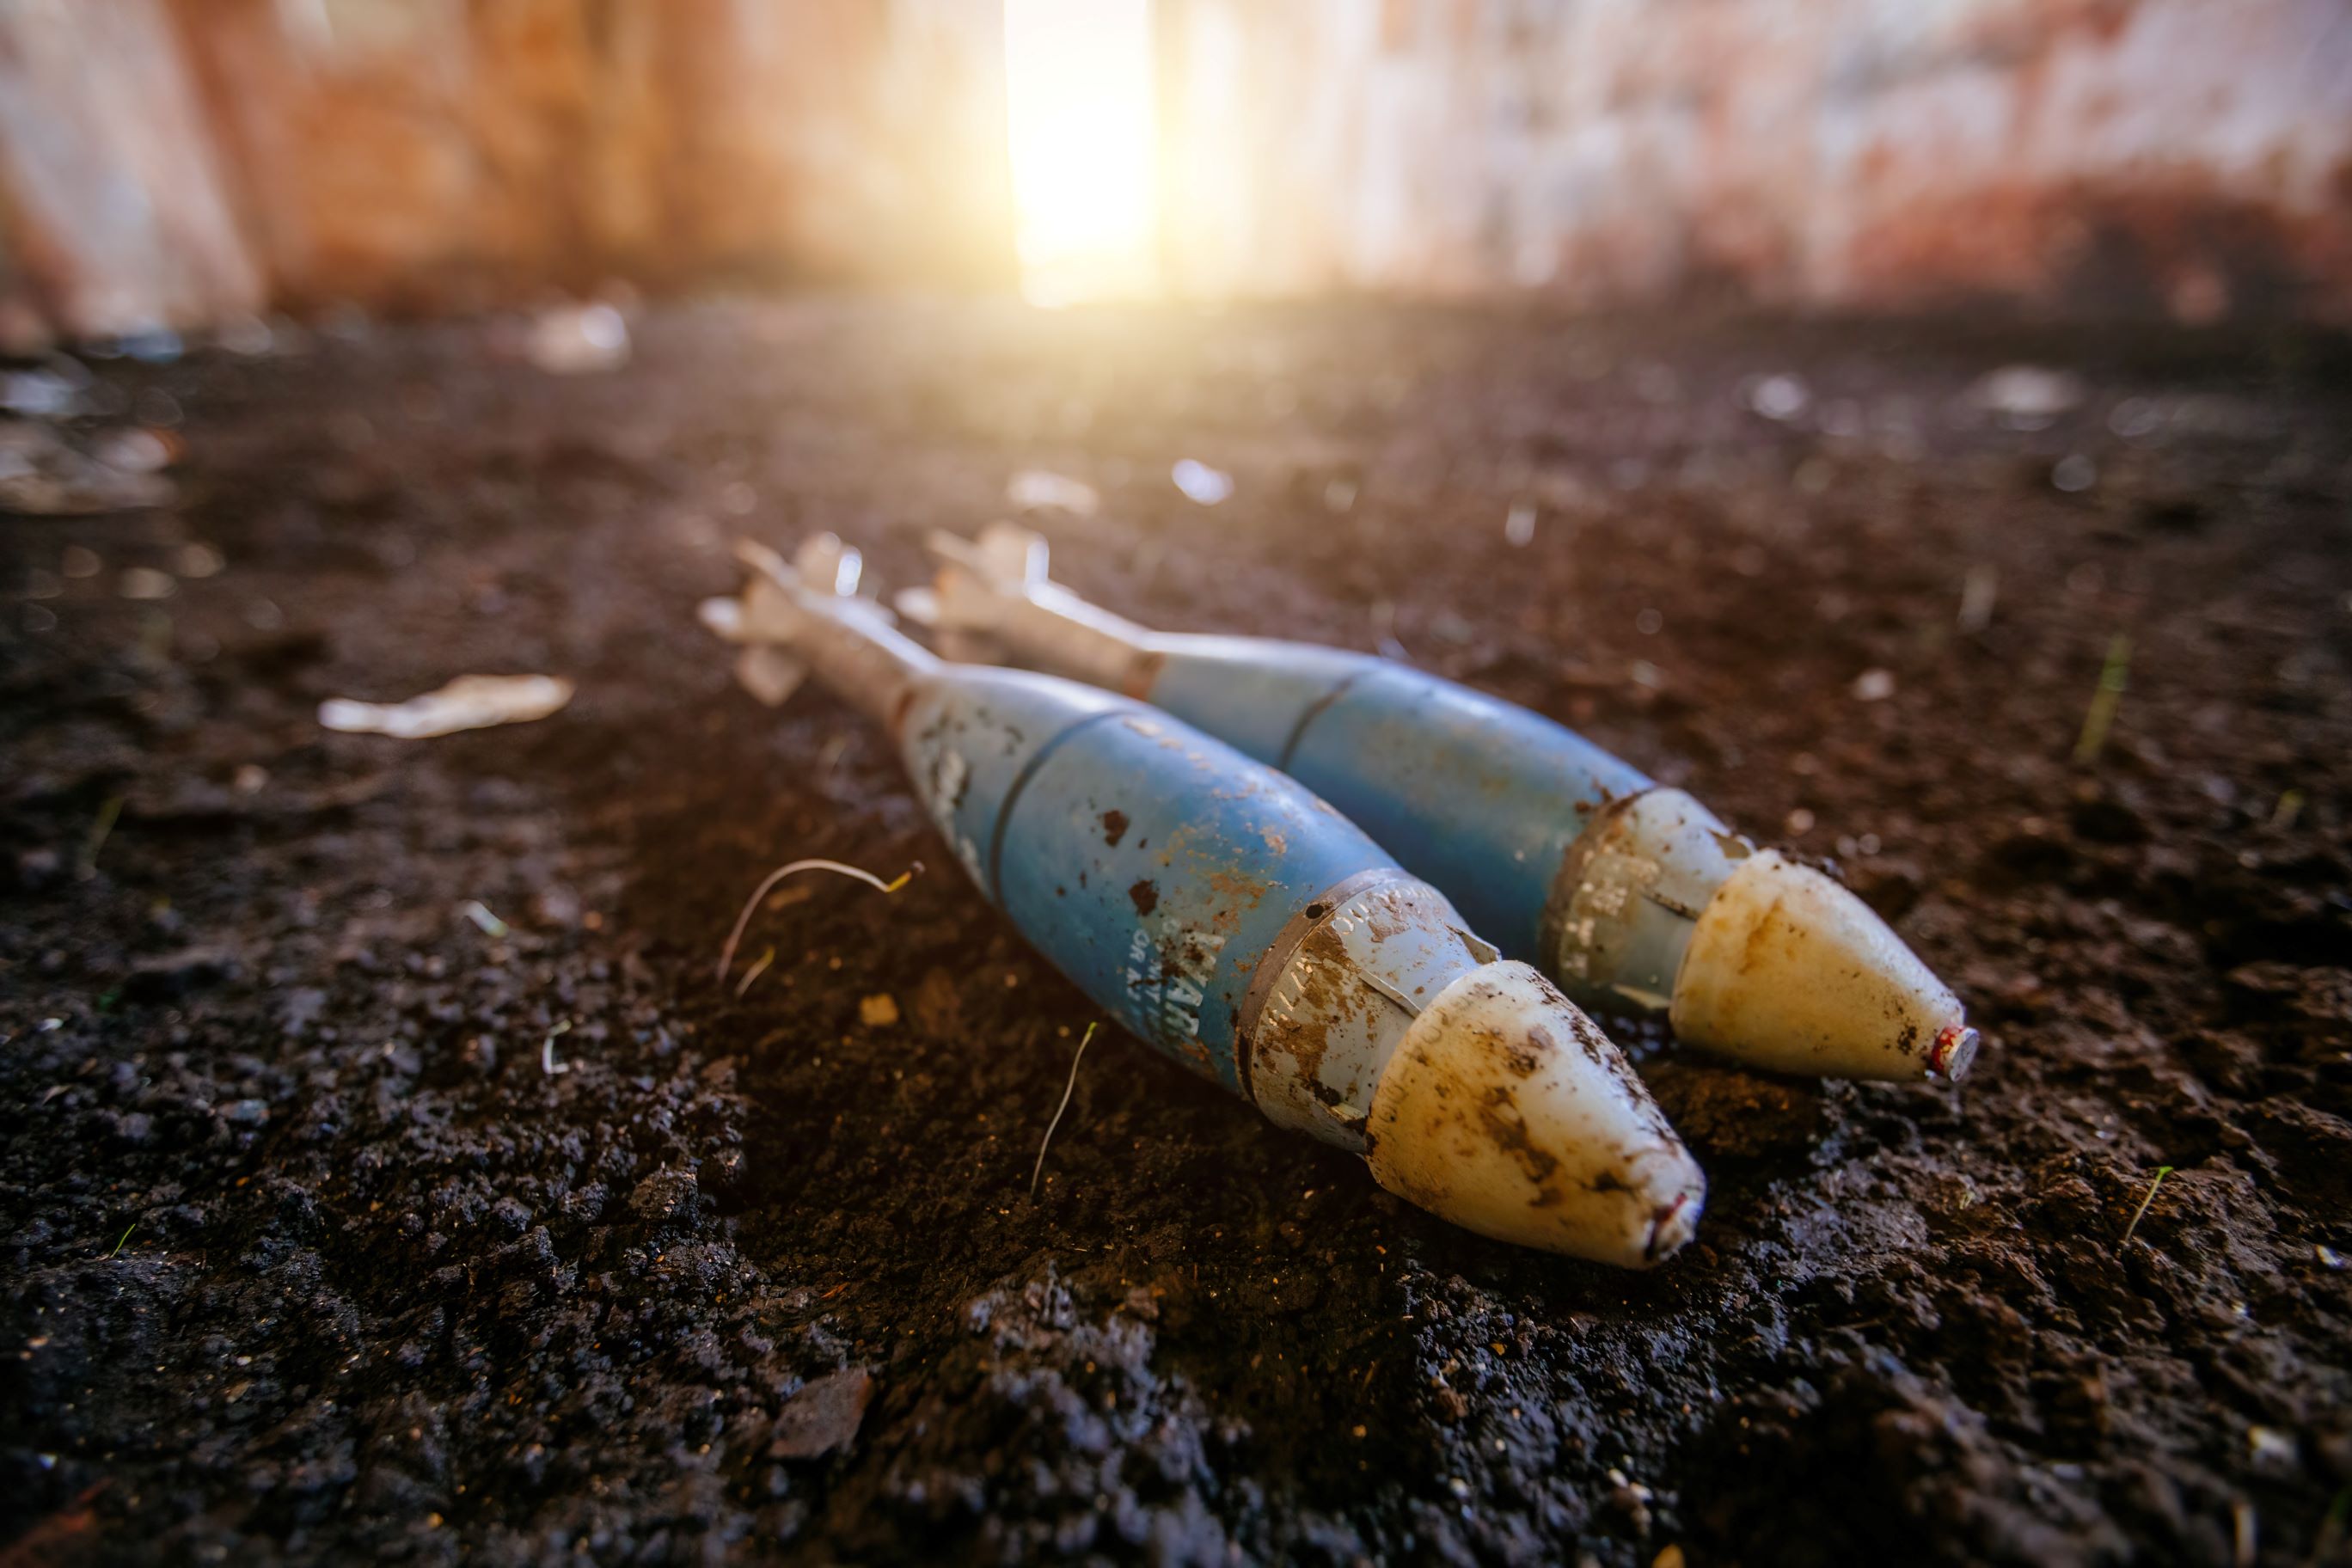 two unexploded ordnance devices on the ground